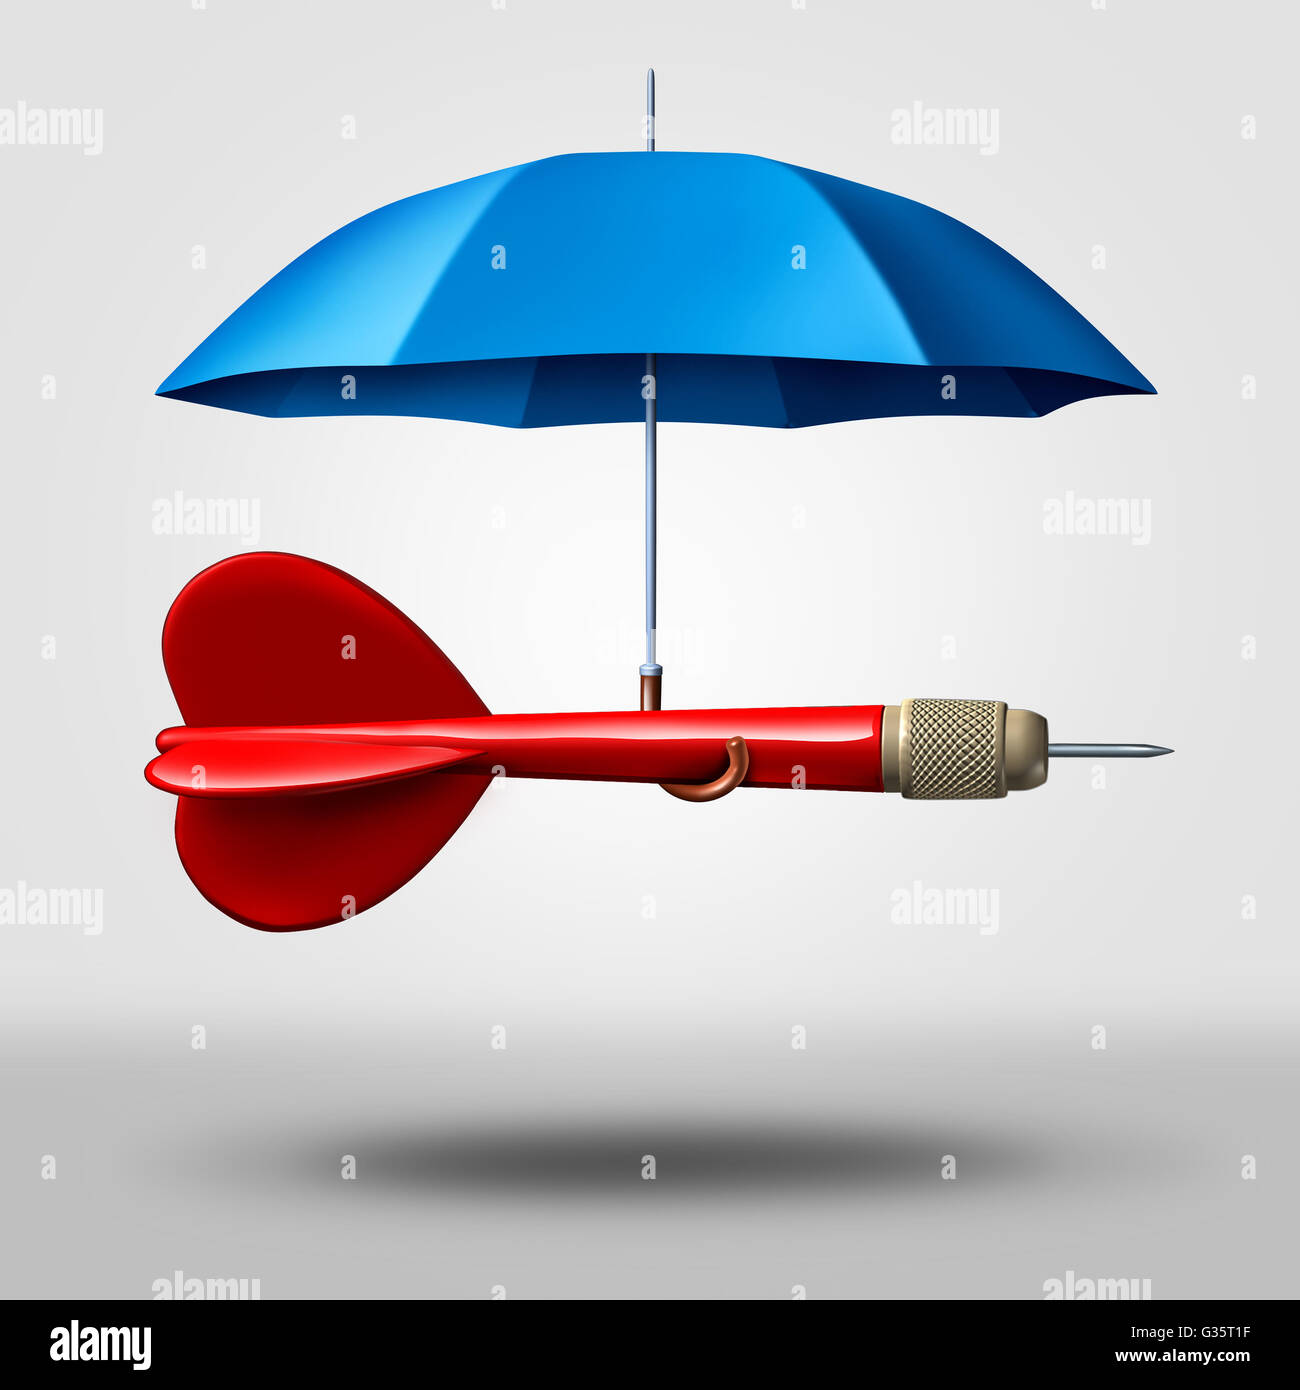 Strategy protection business concept as a dart being supported and protected by an umbrella as a metaphor for providing safety to a goal and plan as a 3D illustration. Stock Photo